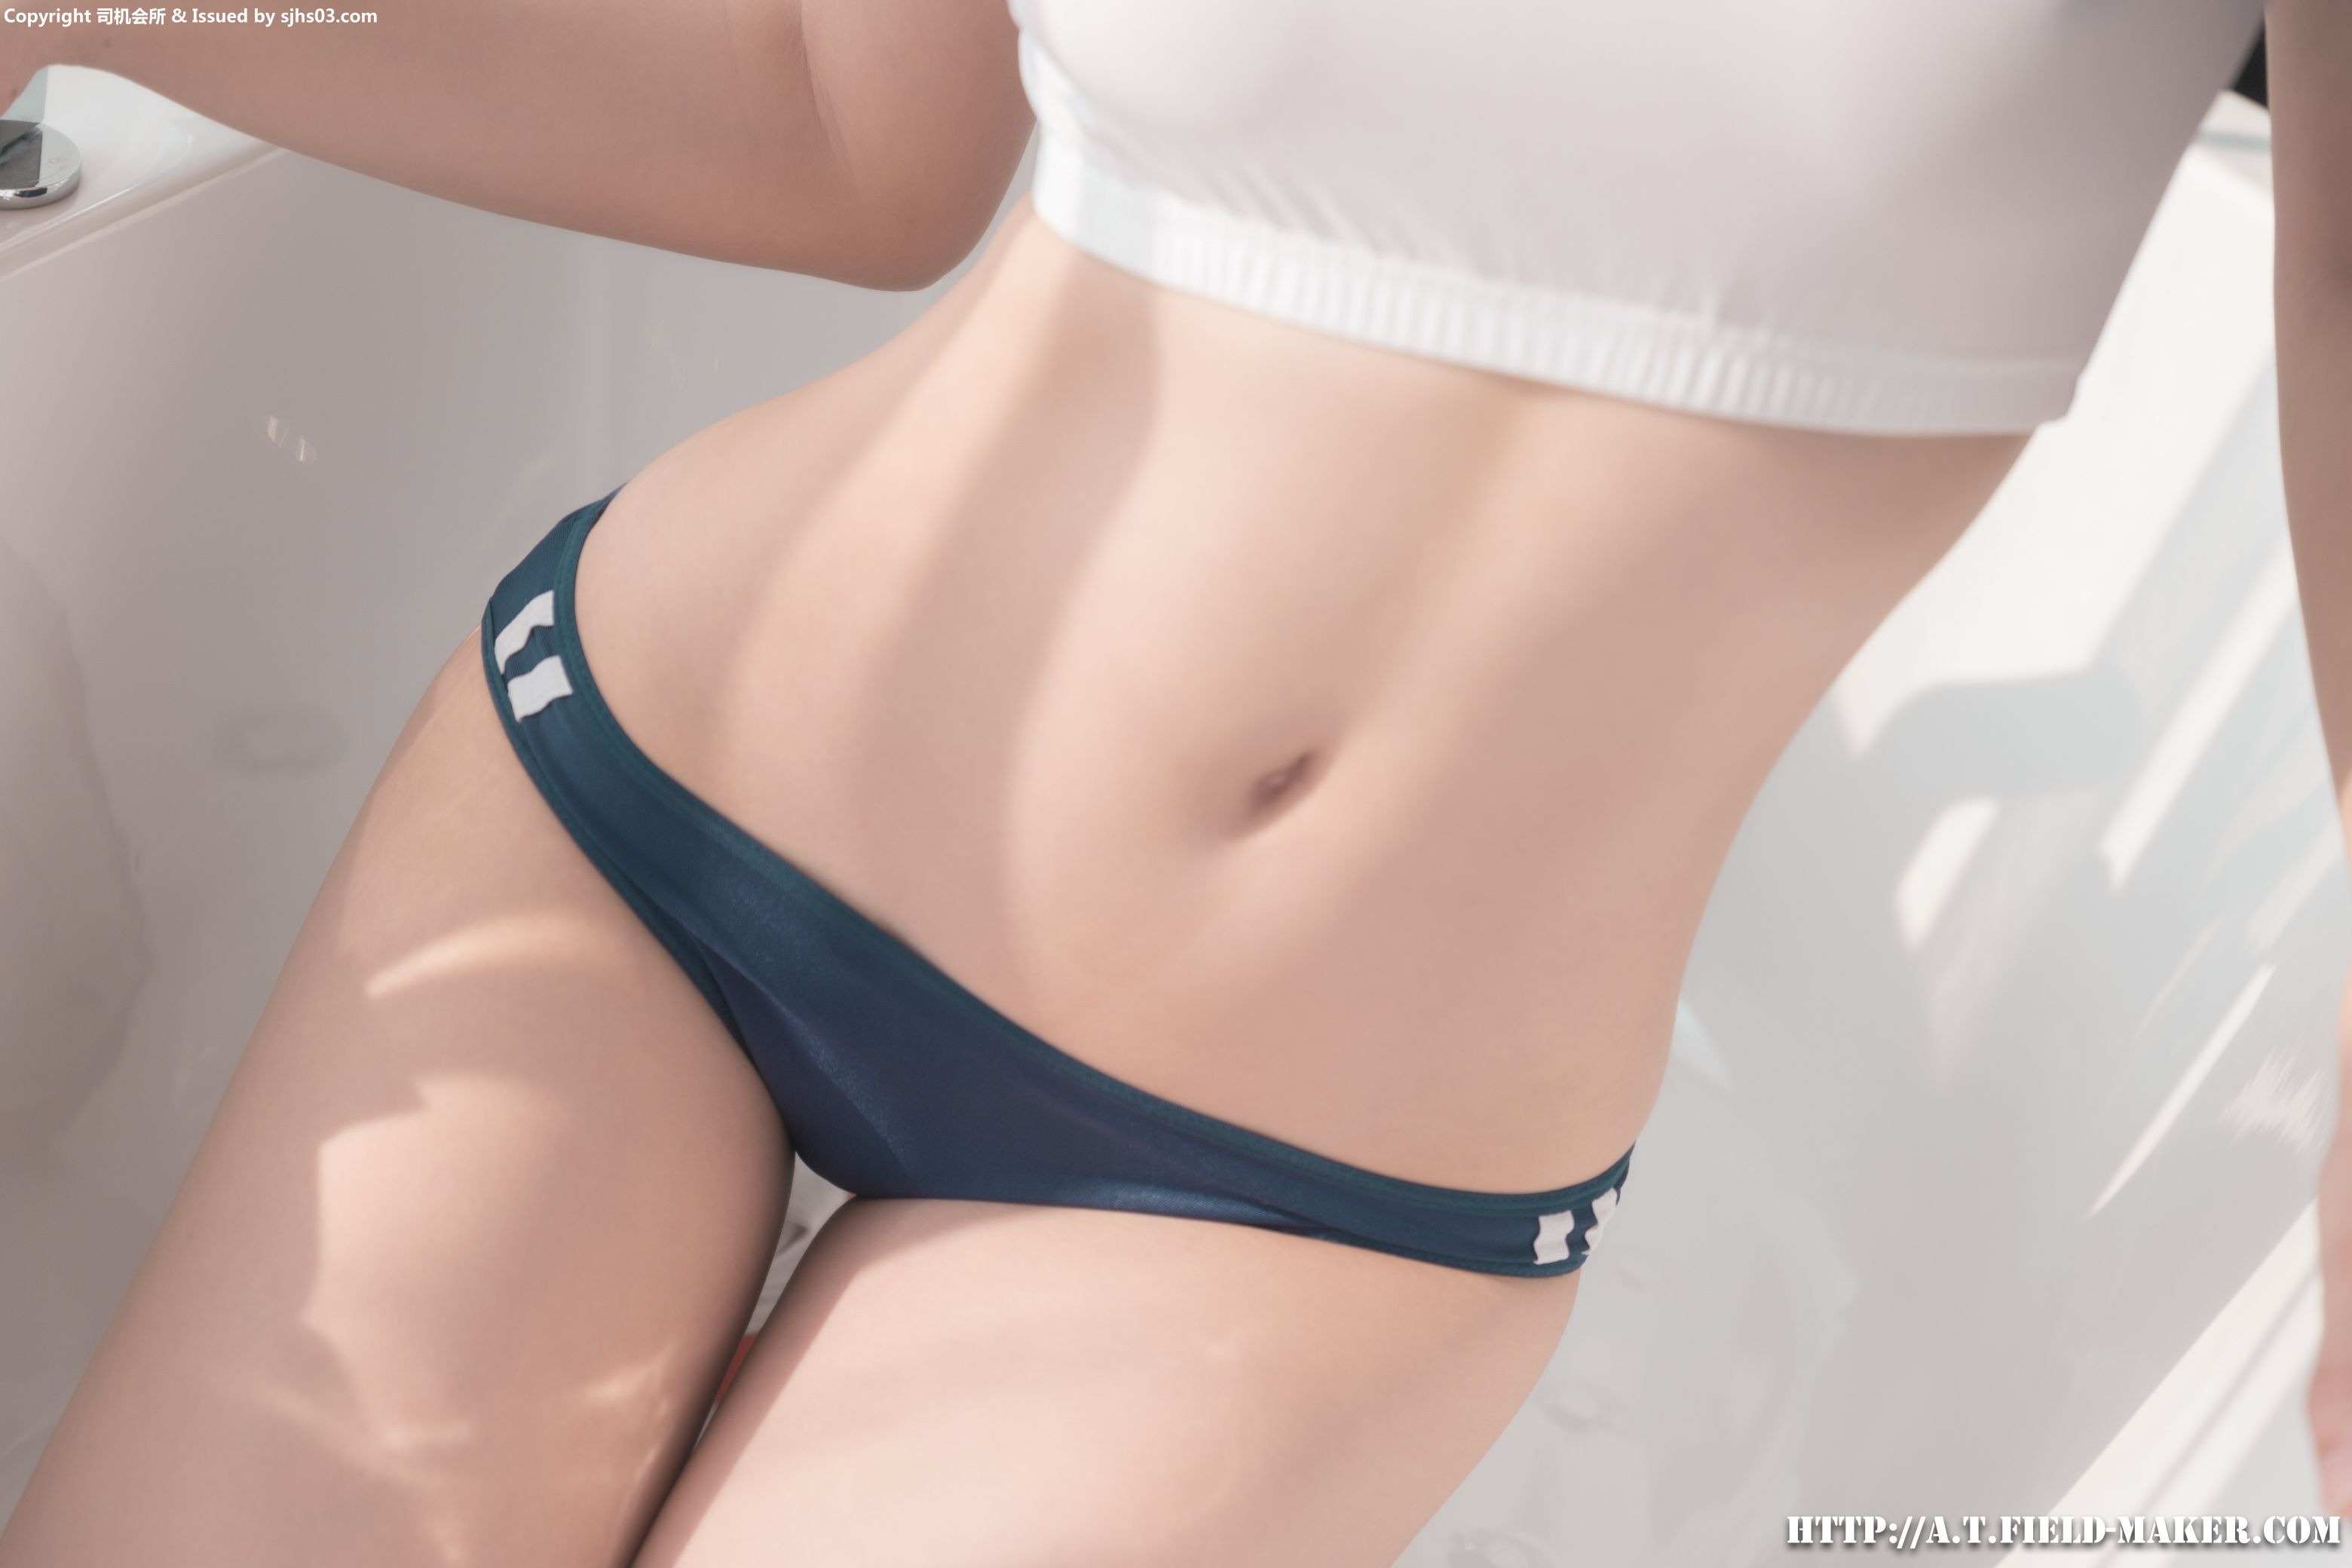 ATFMAKER-GYM SUIT Bloomers[43P](14)